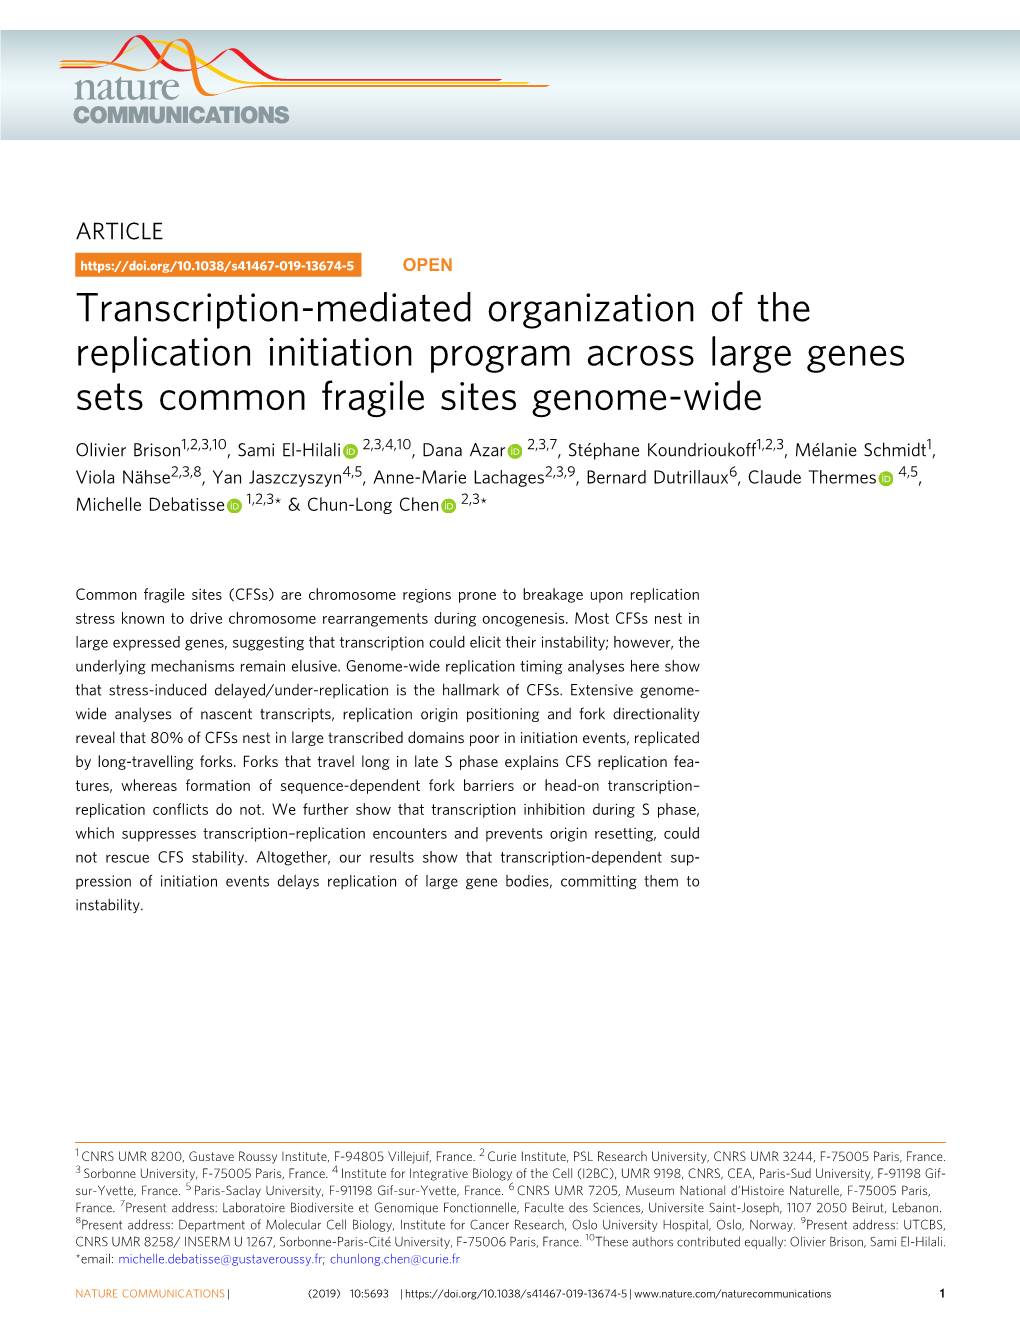 Transcription-Mediated Organization of the Replication Initiation Program Across Large Genes Sets Common Fragile Sites Genome-Wide